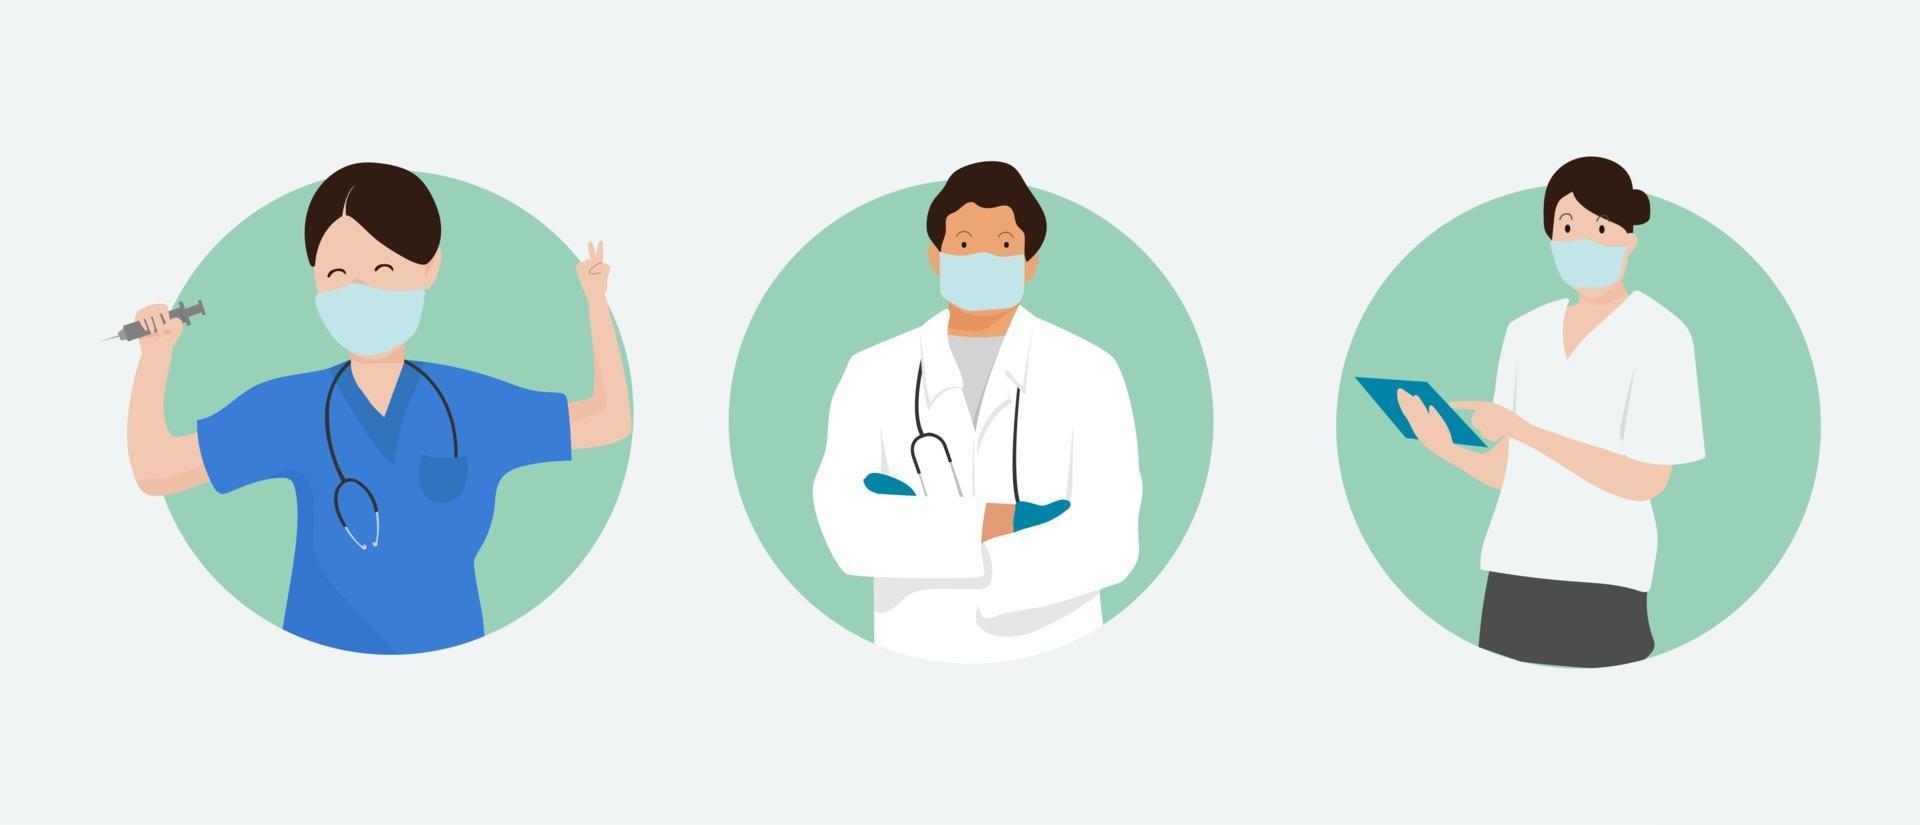 Happy and Funny medical team design in flat style vector